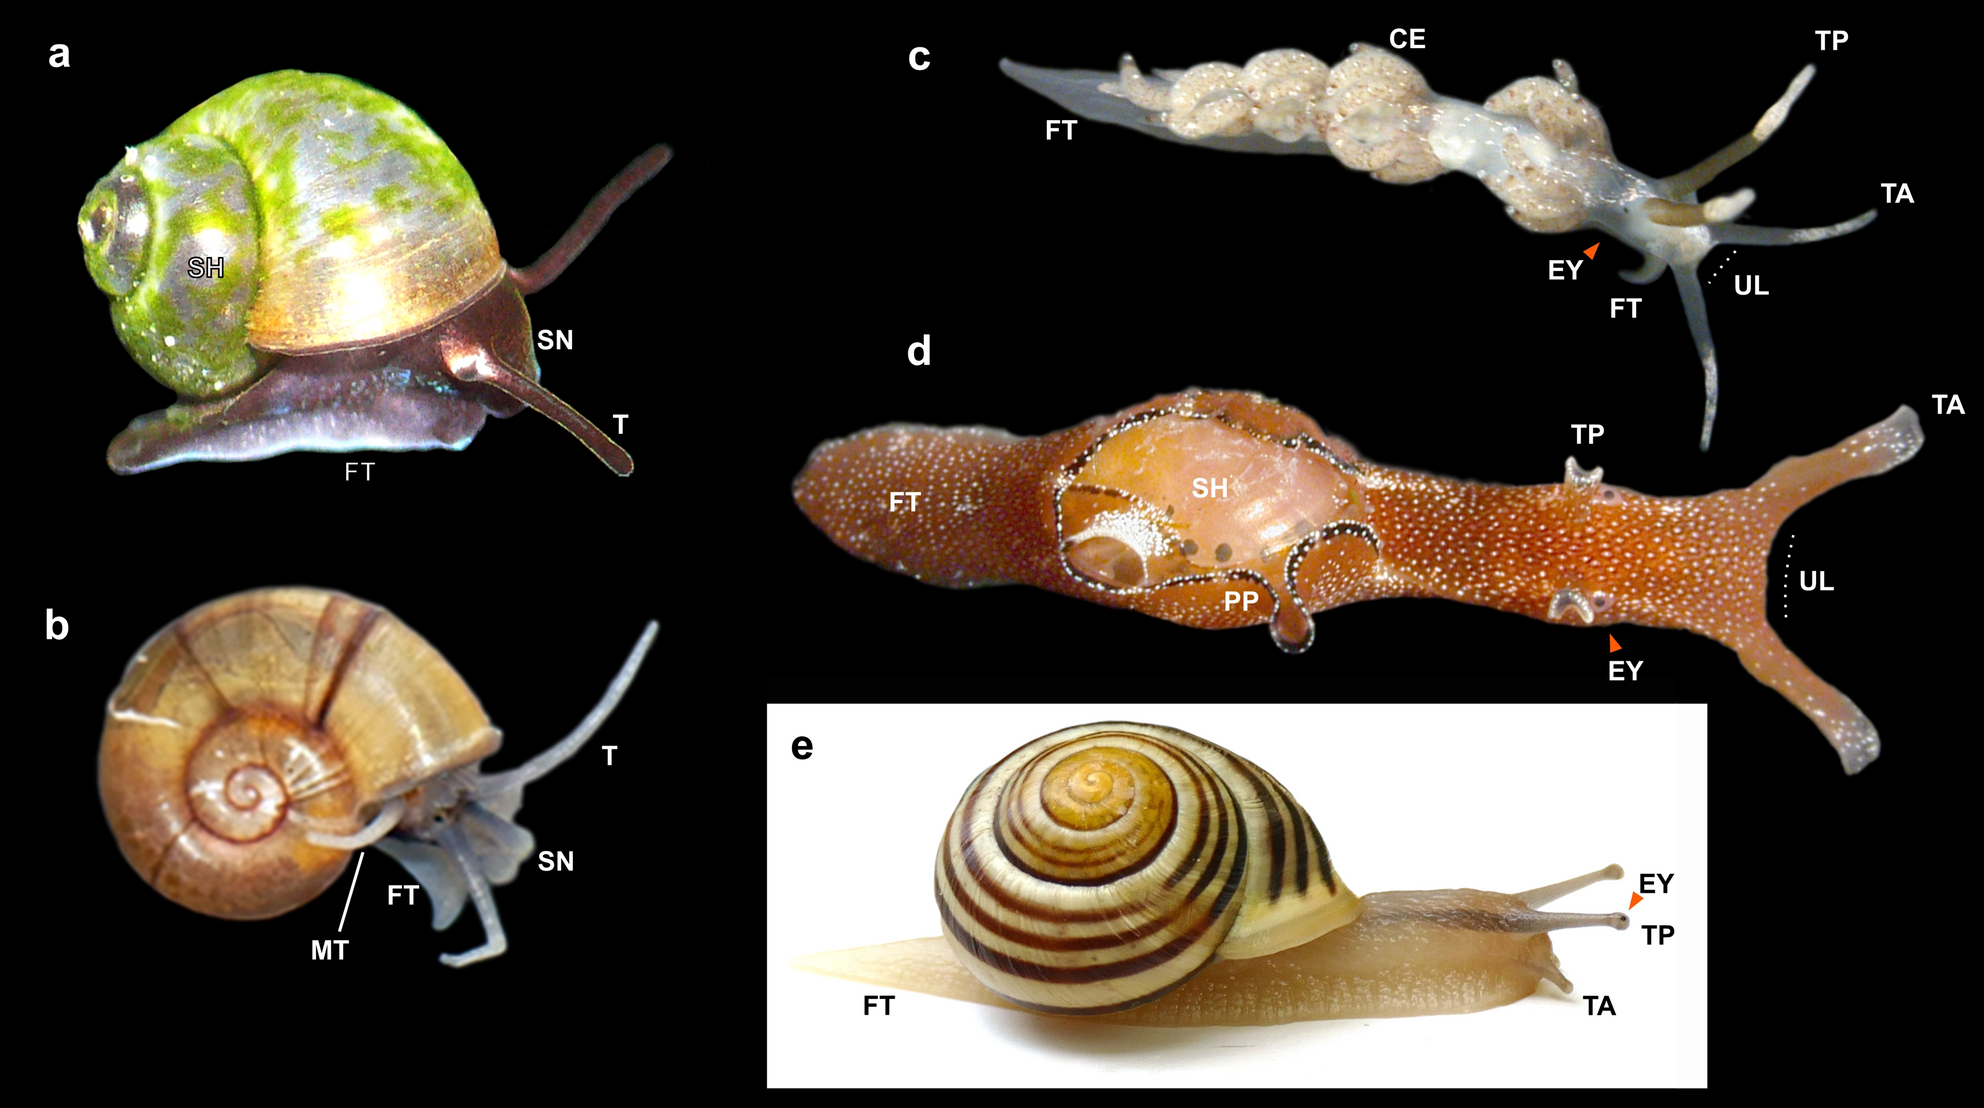 Do snails and slugs have tentacles?